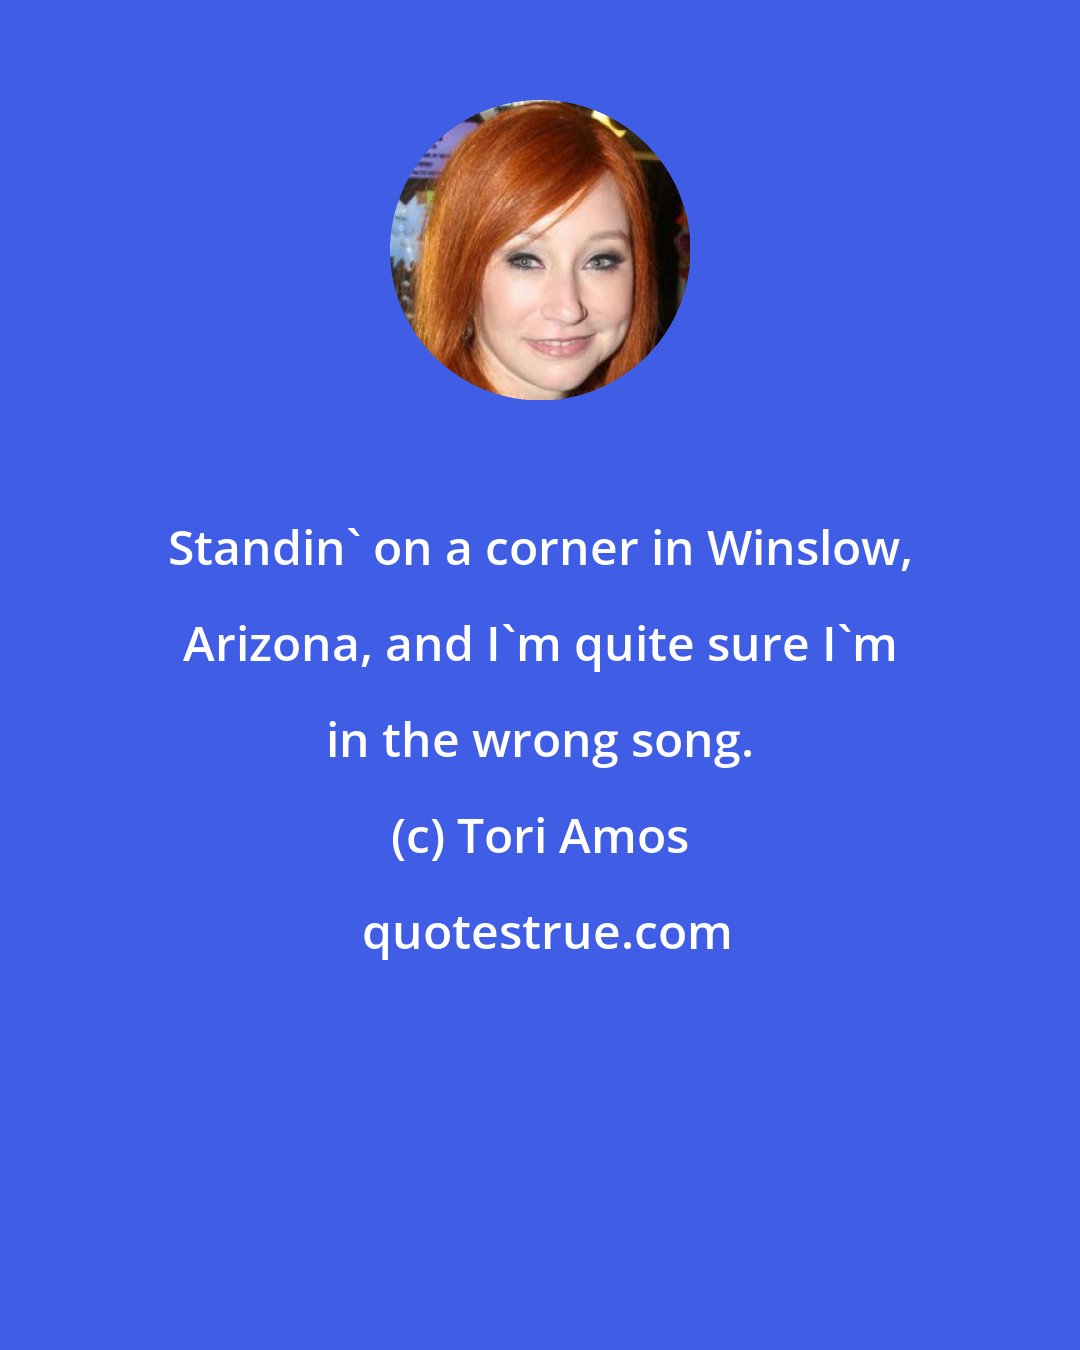 Tori Amos: Standin' on a corner in Winslow, Arizona, and I'm quite sure I'm in the wrong song.